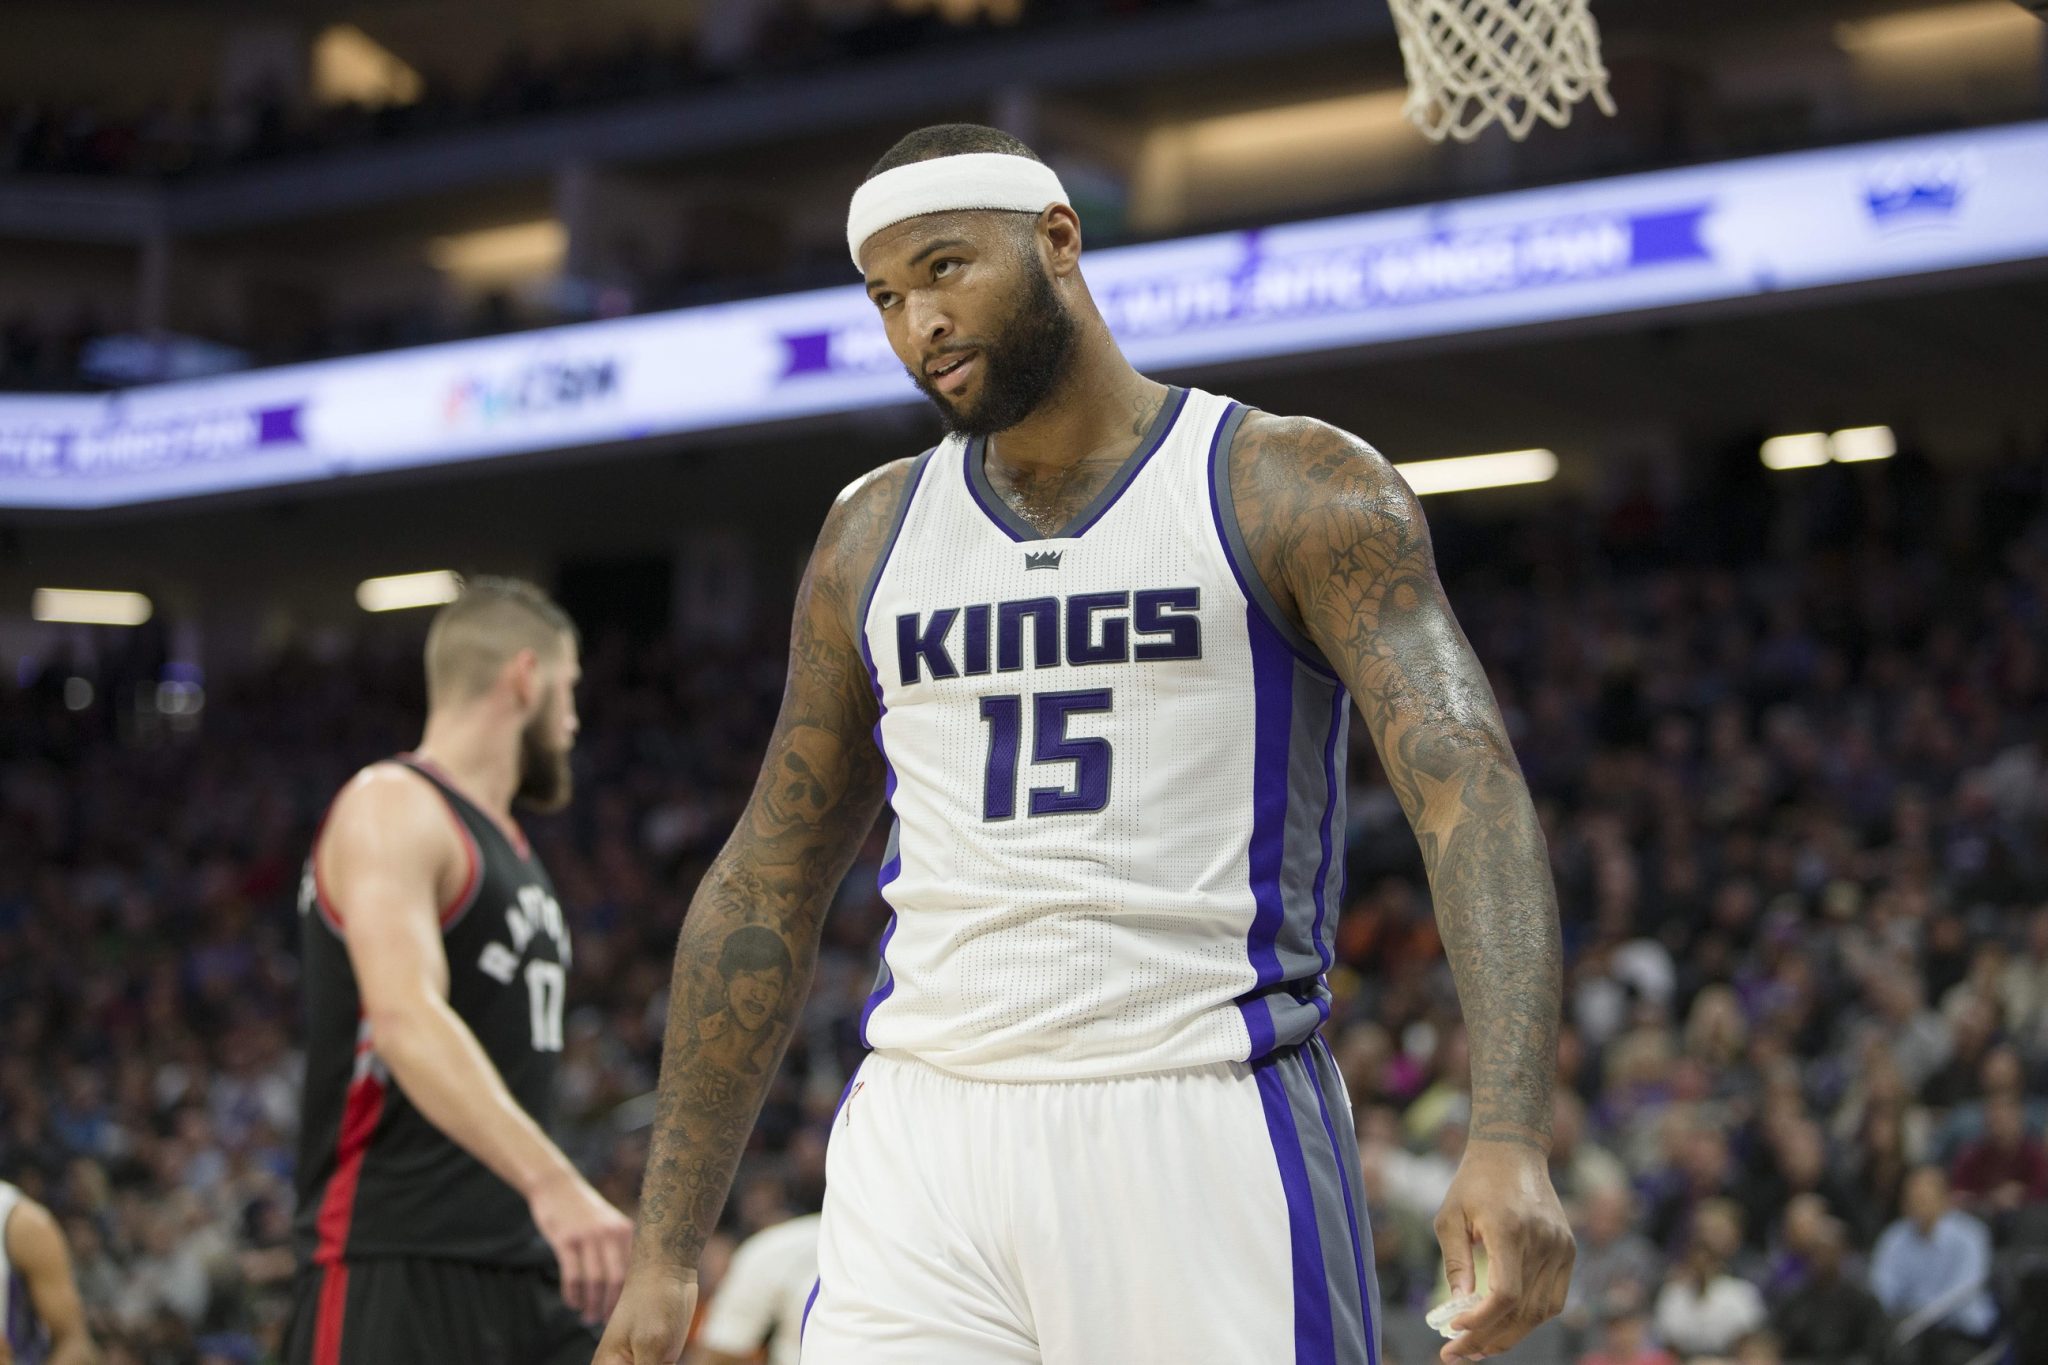 Five NBA teams that should consider tanking in 2016-17 